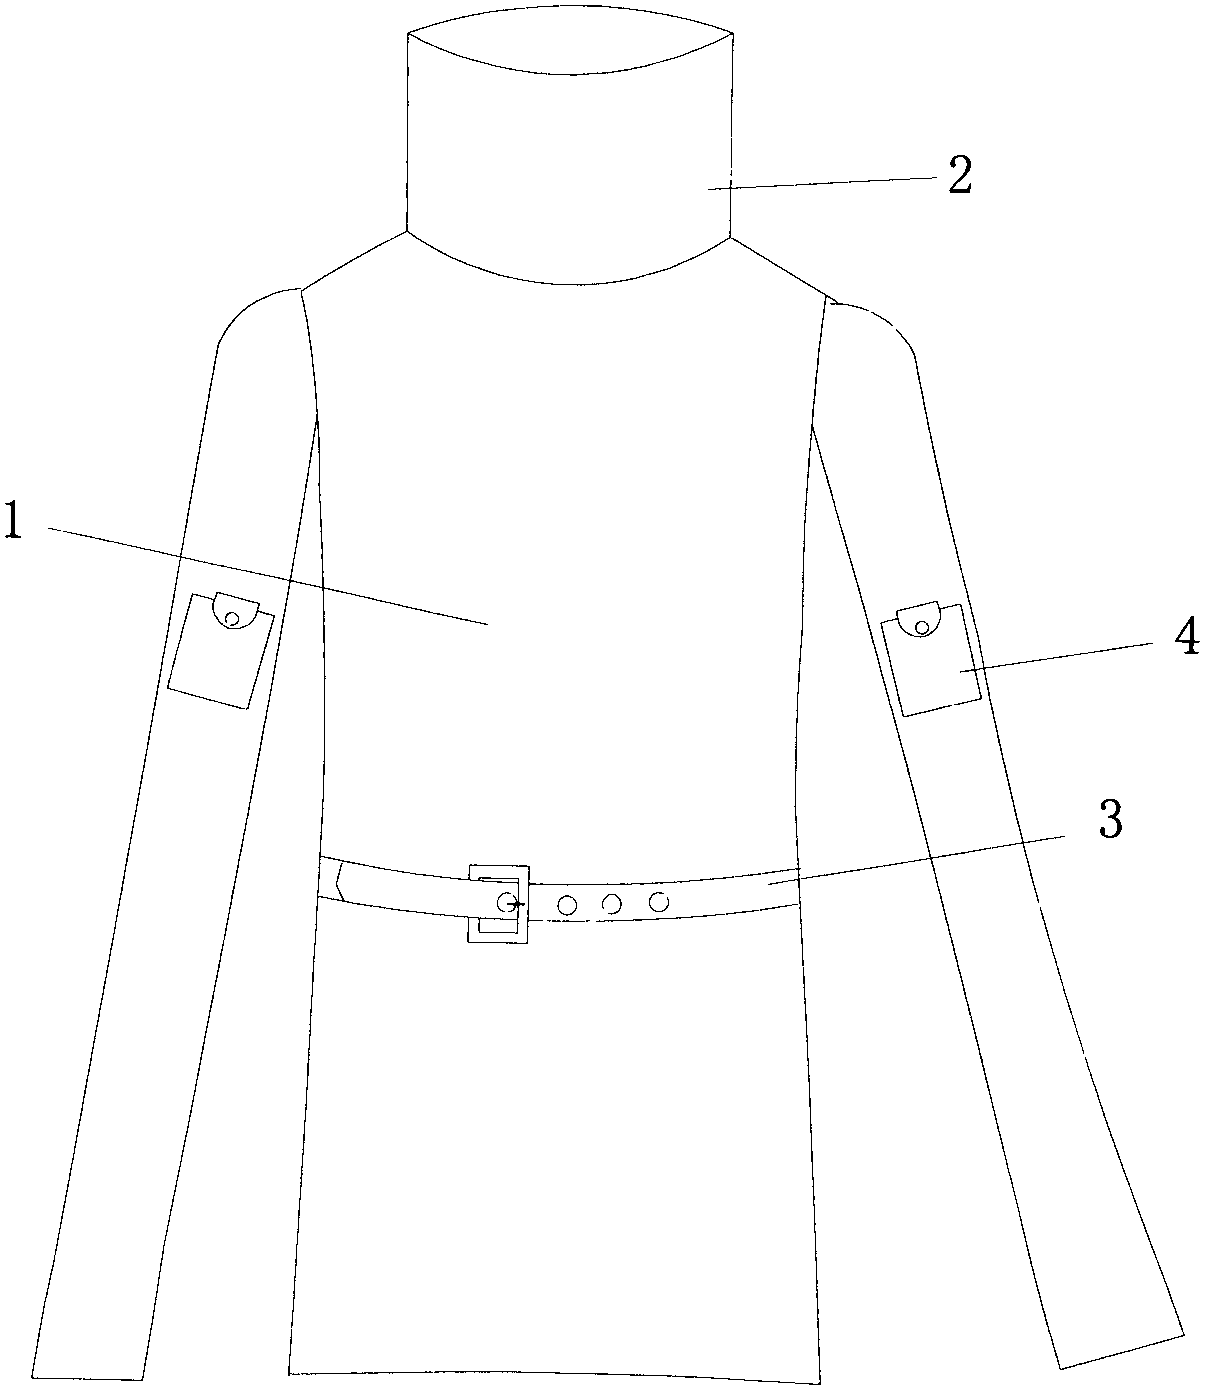 Radiation-proof and deodorant garment with sterilization function